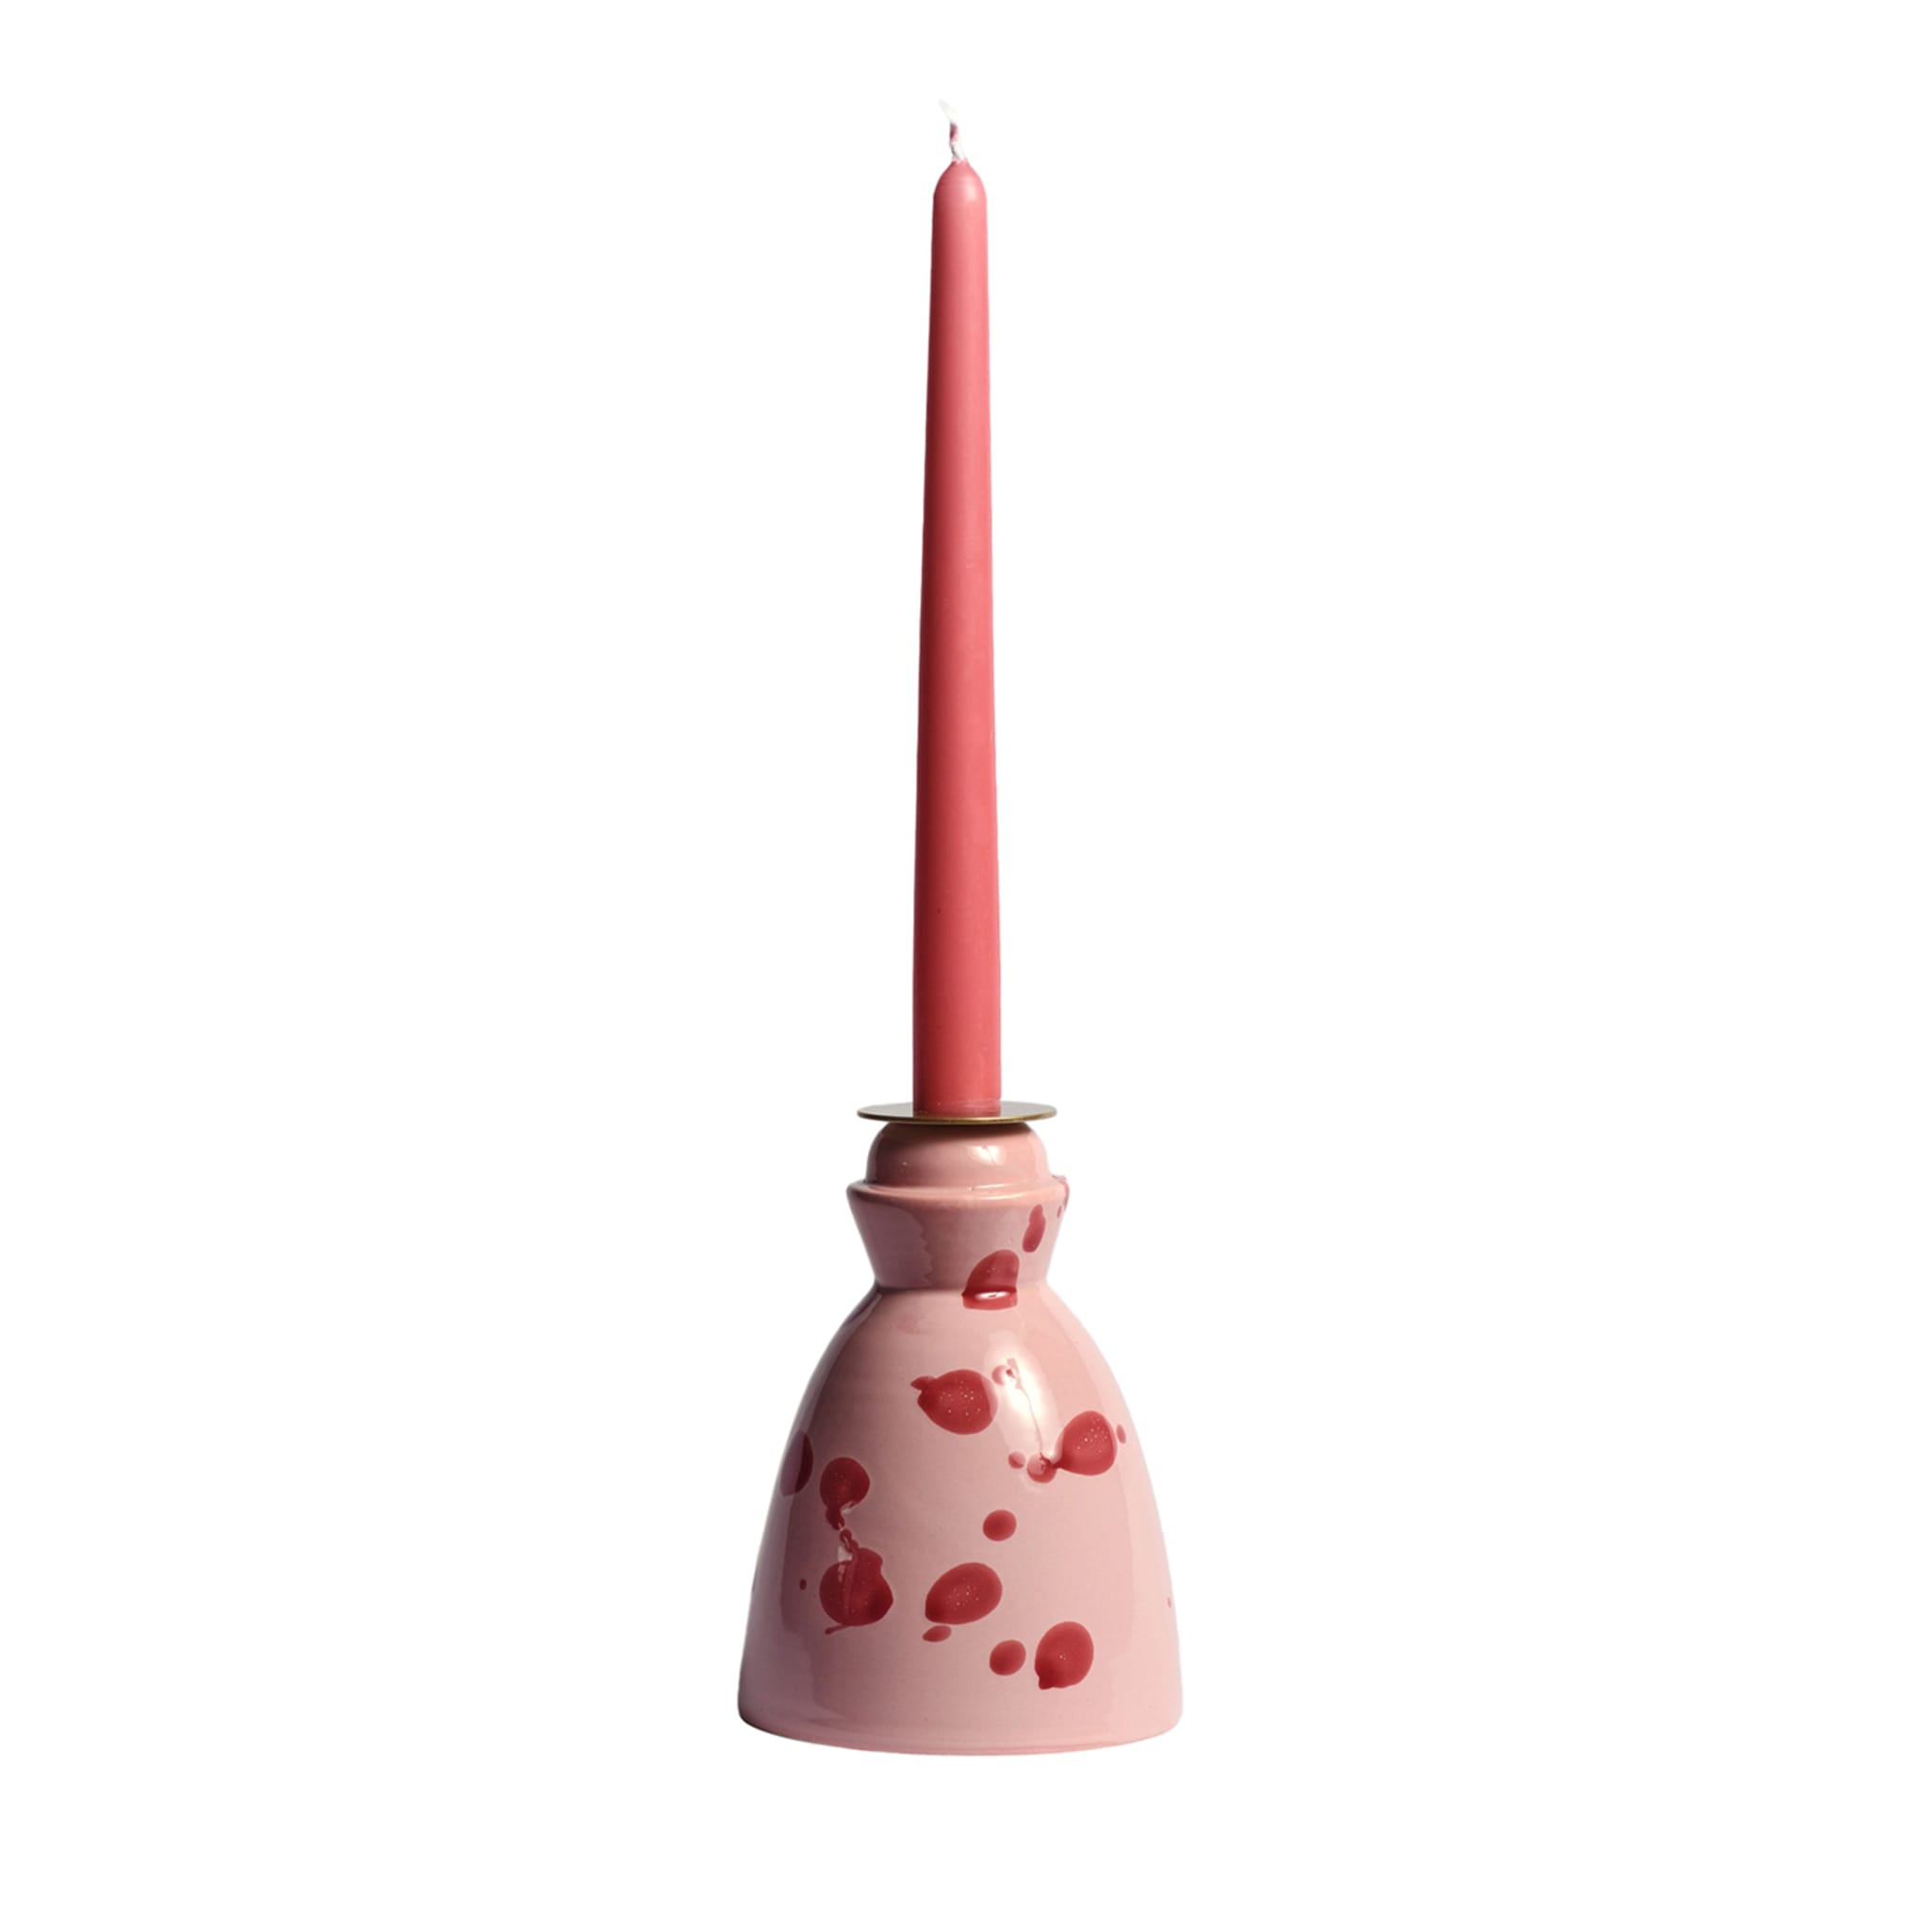 Rose Ceramic Candlestick with 4 Scented Candles - Main view